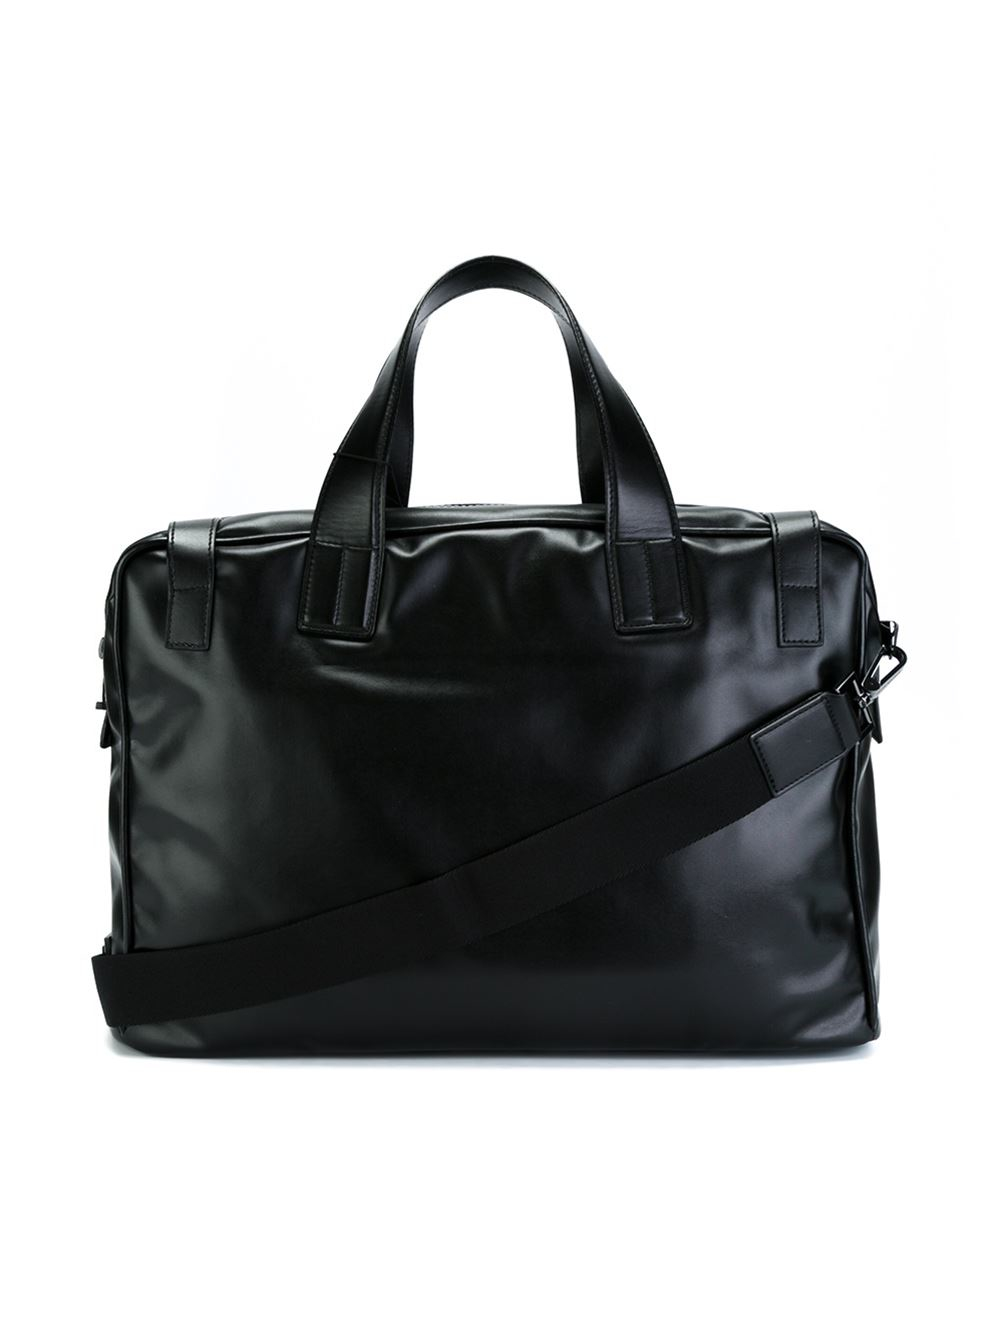 Emporio Armani Quilted Travel Bag in Black for Men - Lyst